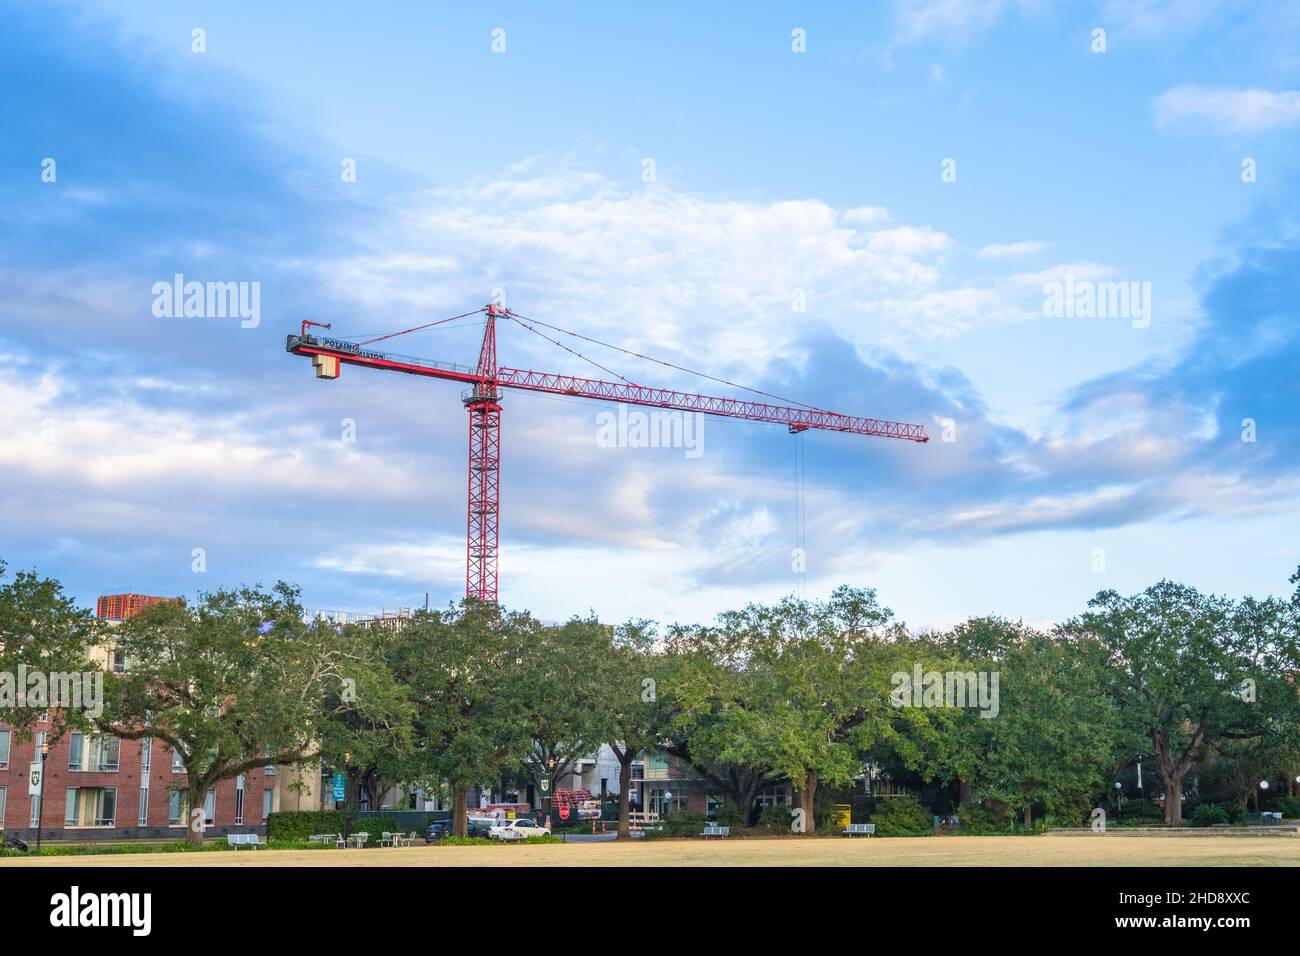 NEW ORLEANS, LA, USA - NOVEMBER 24, 2021: Cantilever crane with blue sky and clouds in the background over Tulane University campus Stock Photo